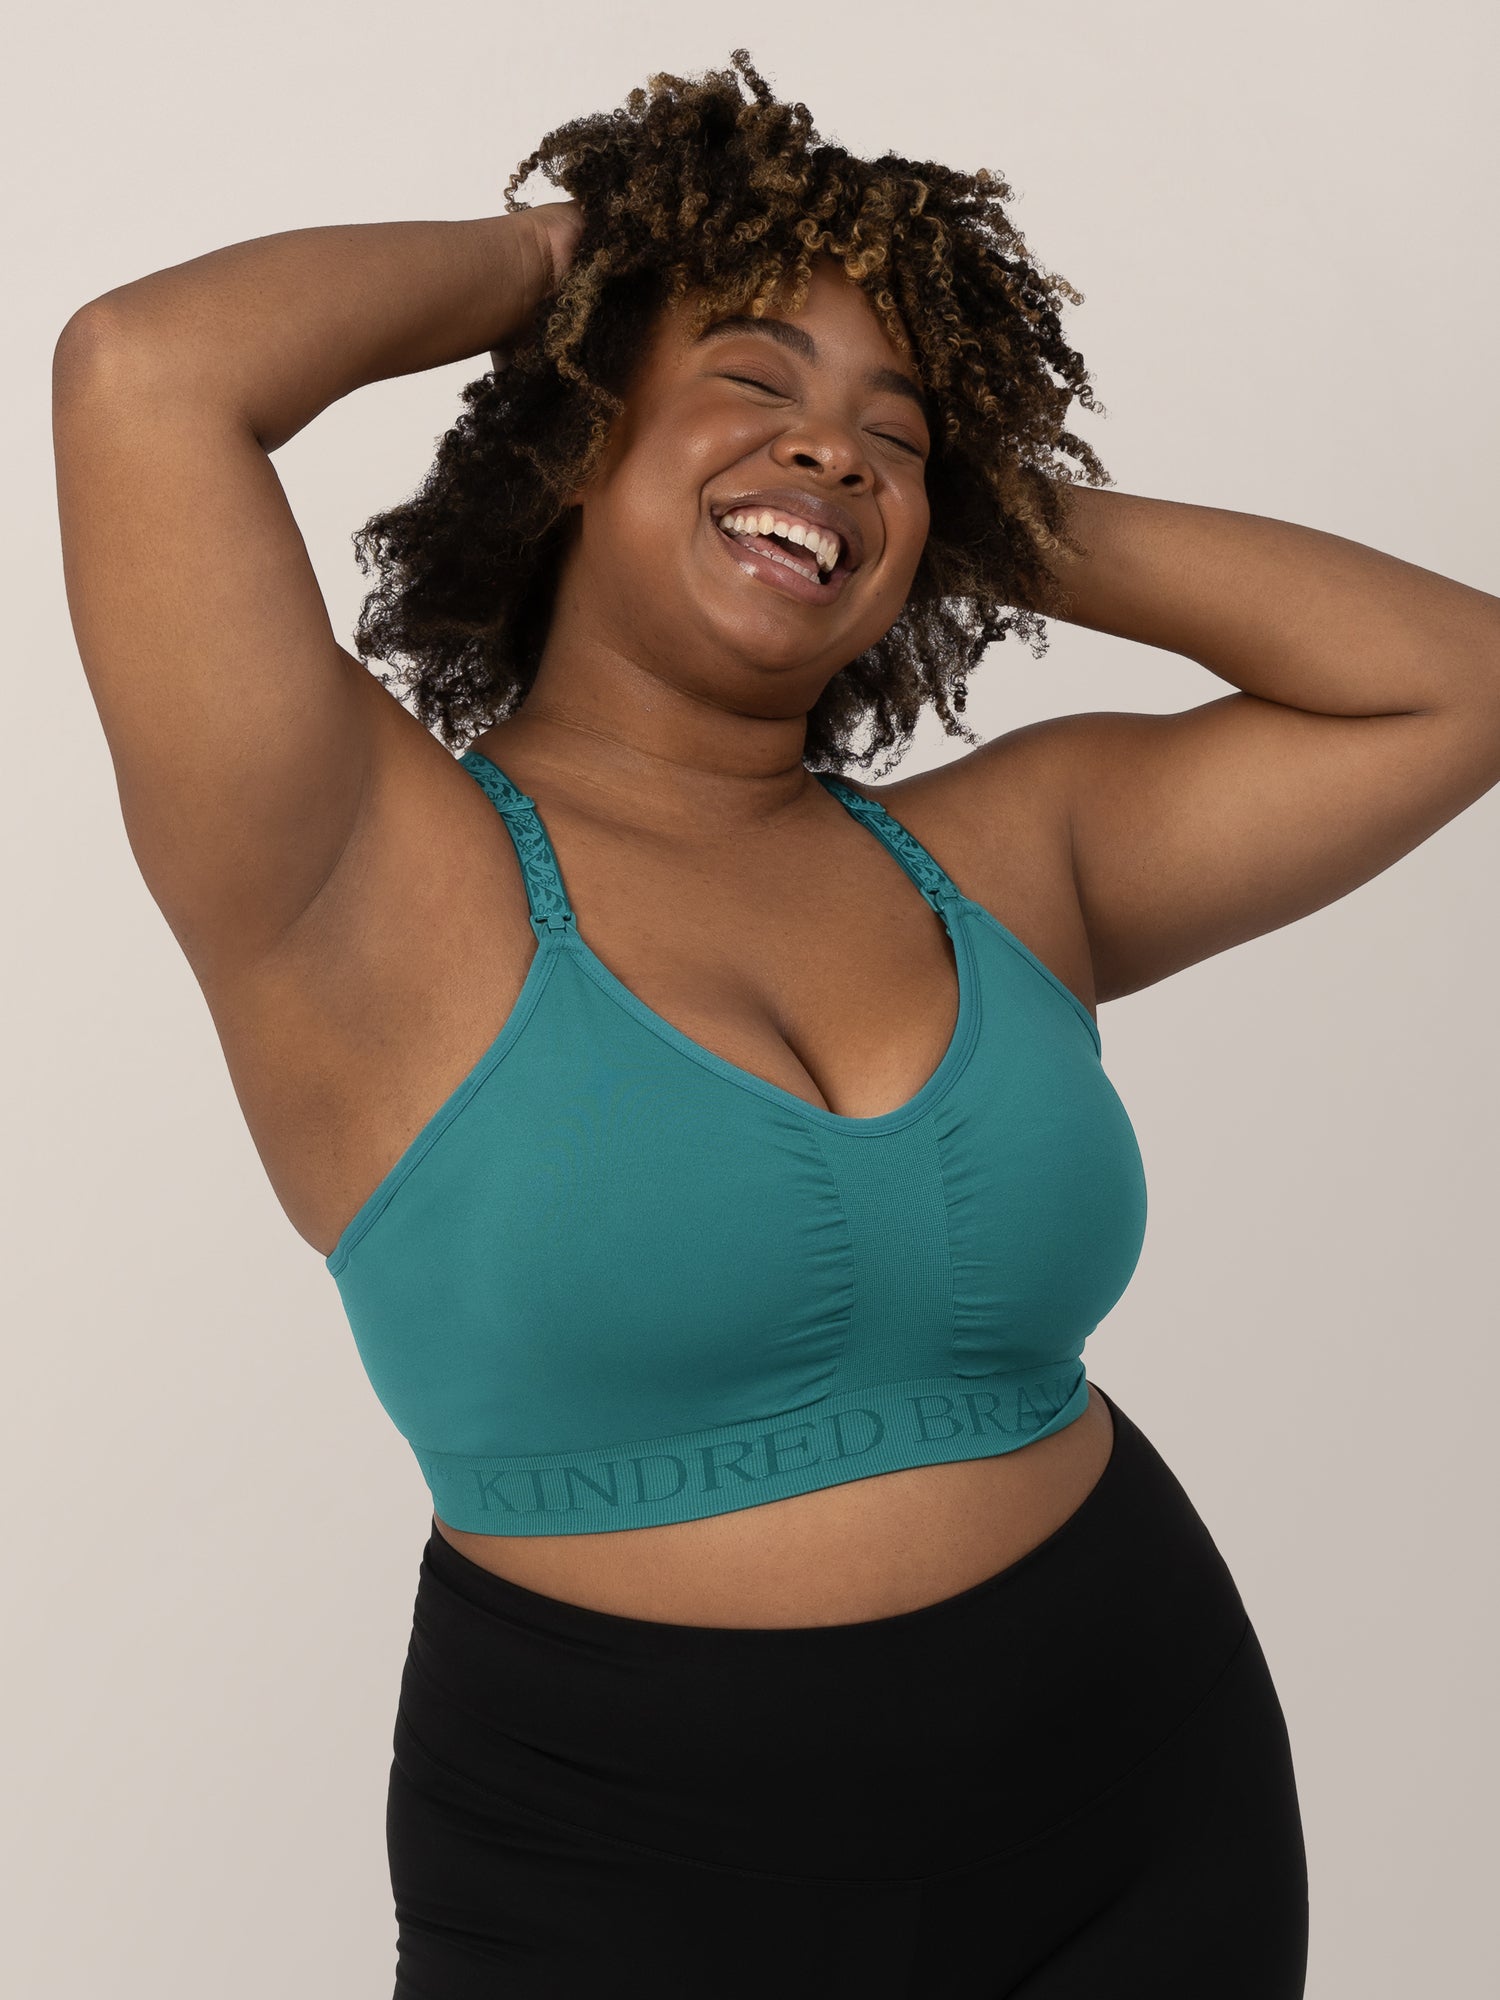 Kindred Bravely Plus Sublime Hands-Free Pumping & Nursing Sports Bra s -  Fits 38B-46D